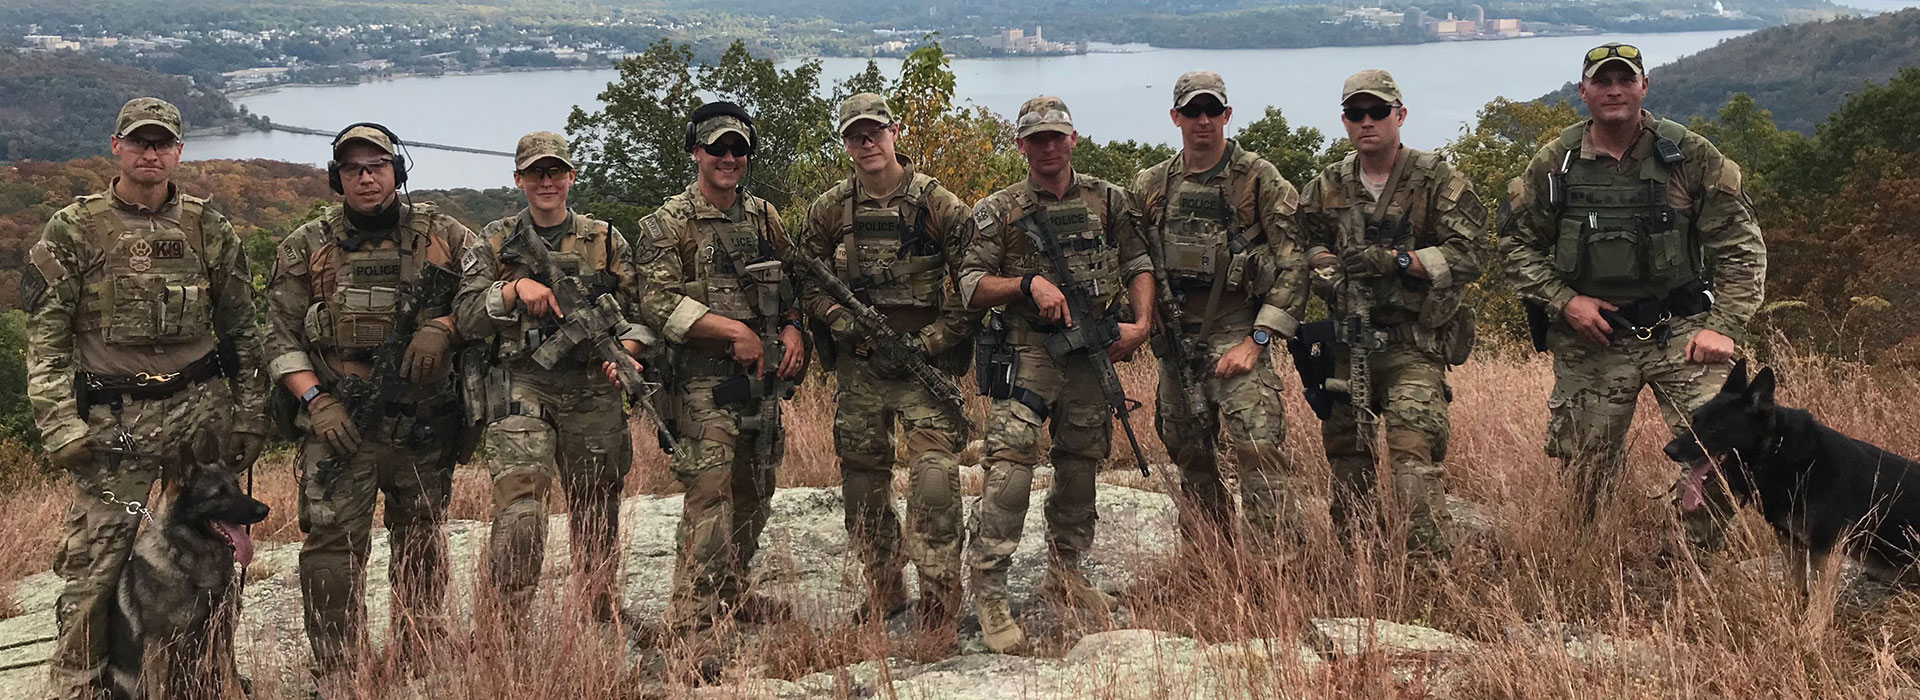 Justanna Bohling is pictured with her fellow Special Operations Group following a mission to search for a fugitive wanted for murder.